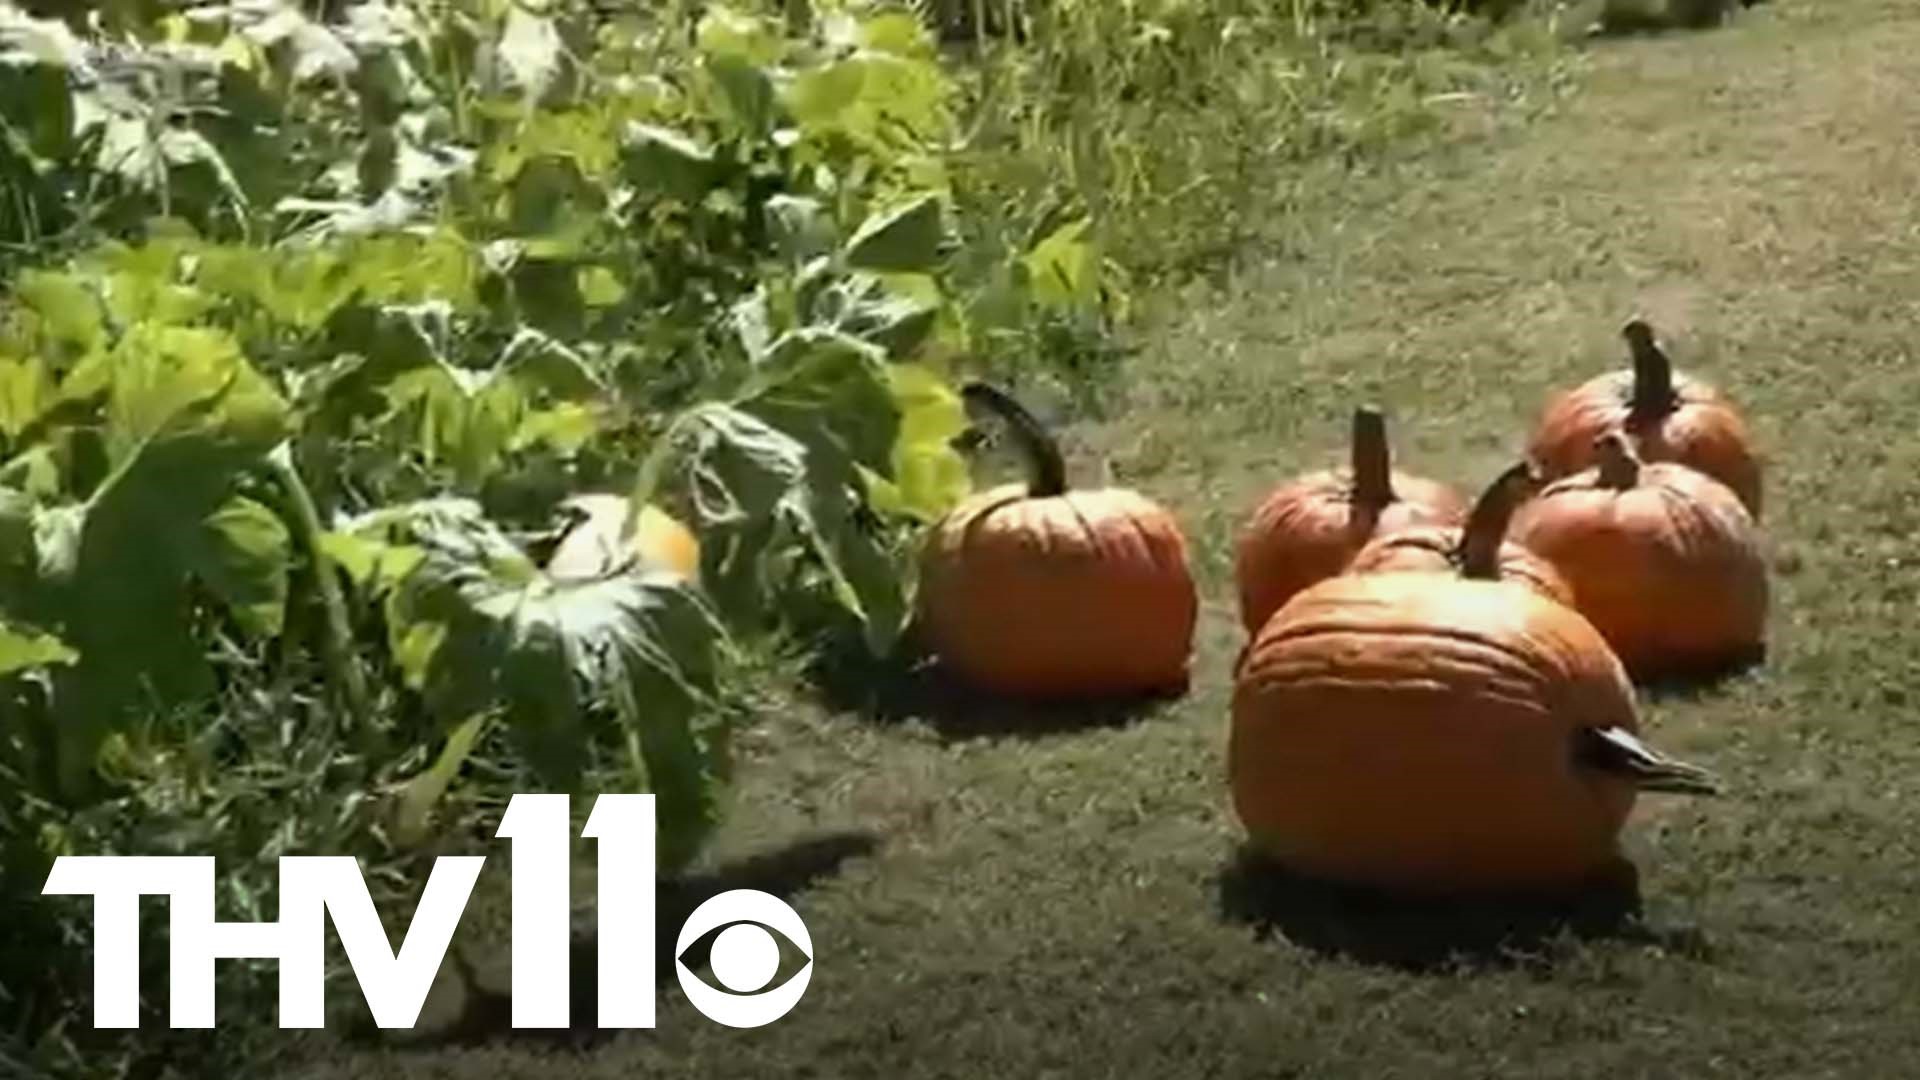 It's October, and many of us are thinking about Halloween. What better place to go than a pumpkin patch? But some challenges are threatening this holiday tradition.